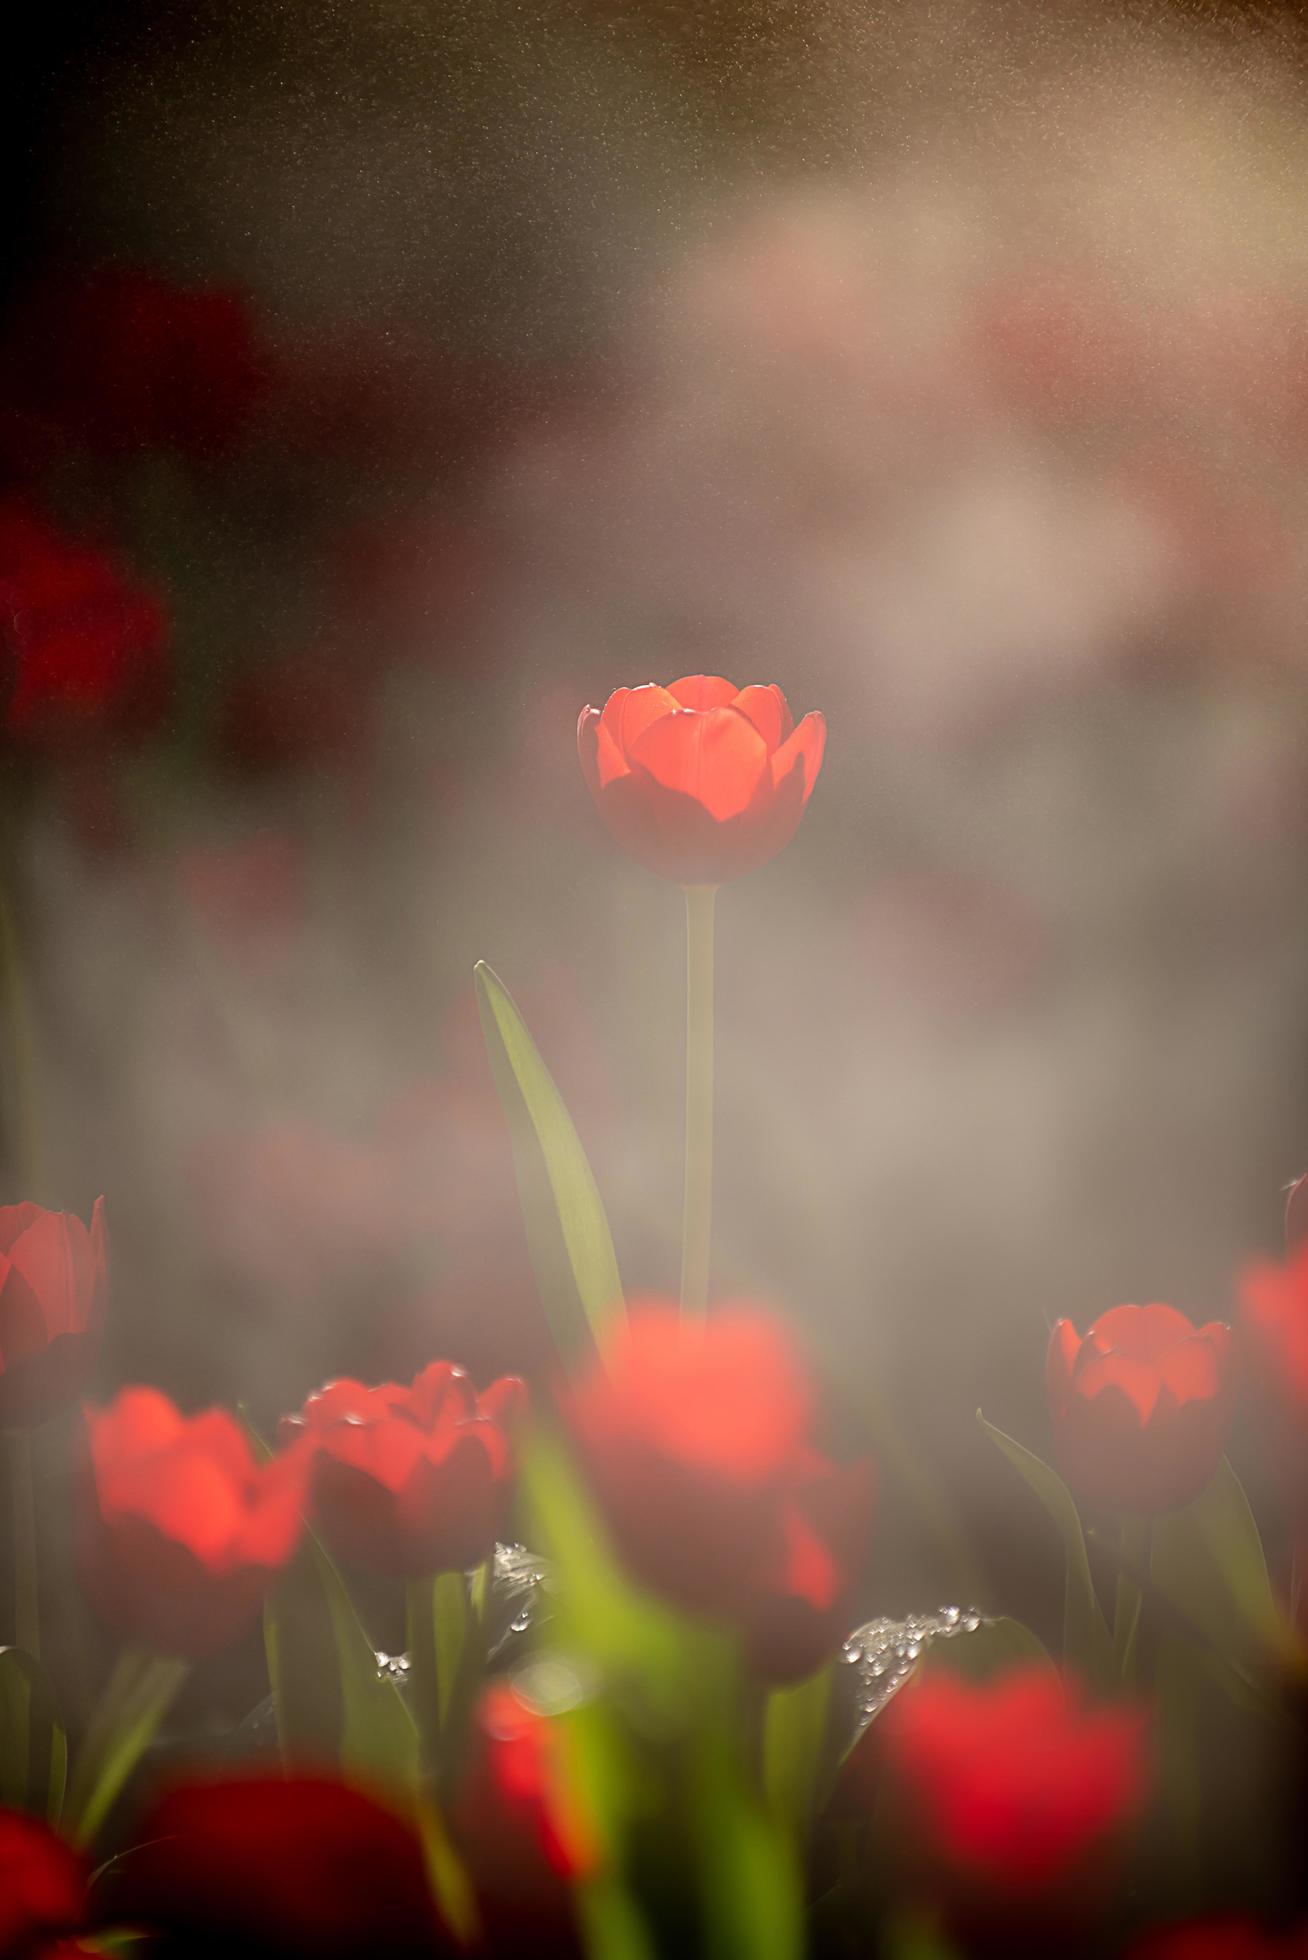 Red tulips in dark tones close up. Fresh spring flowers in the garden with soft sunlight for vertical floral poster, wallpaper or holiday card